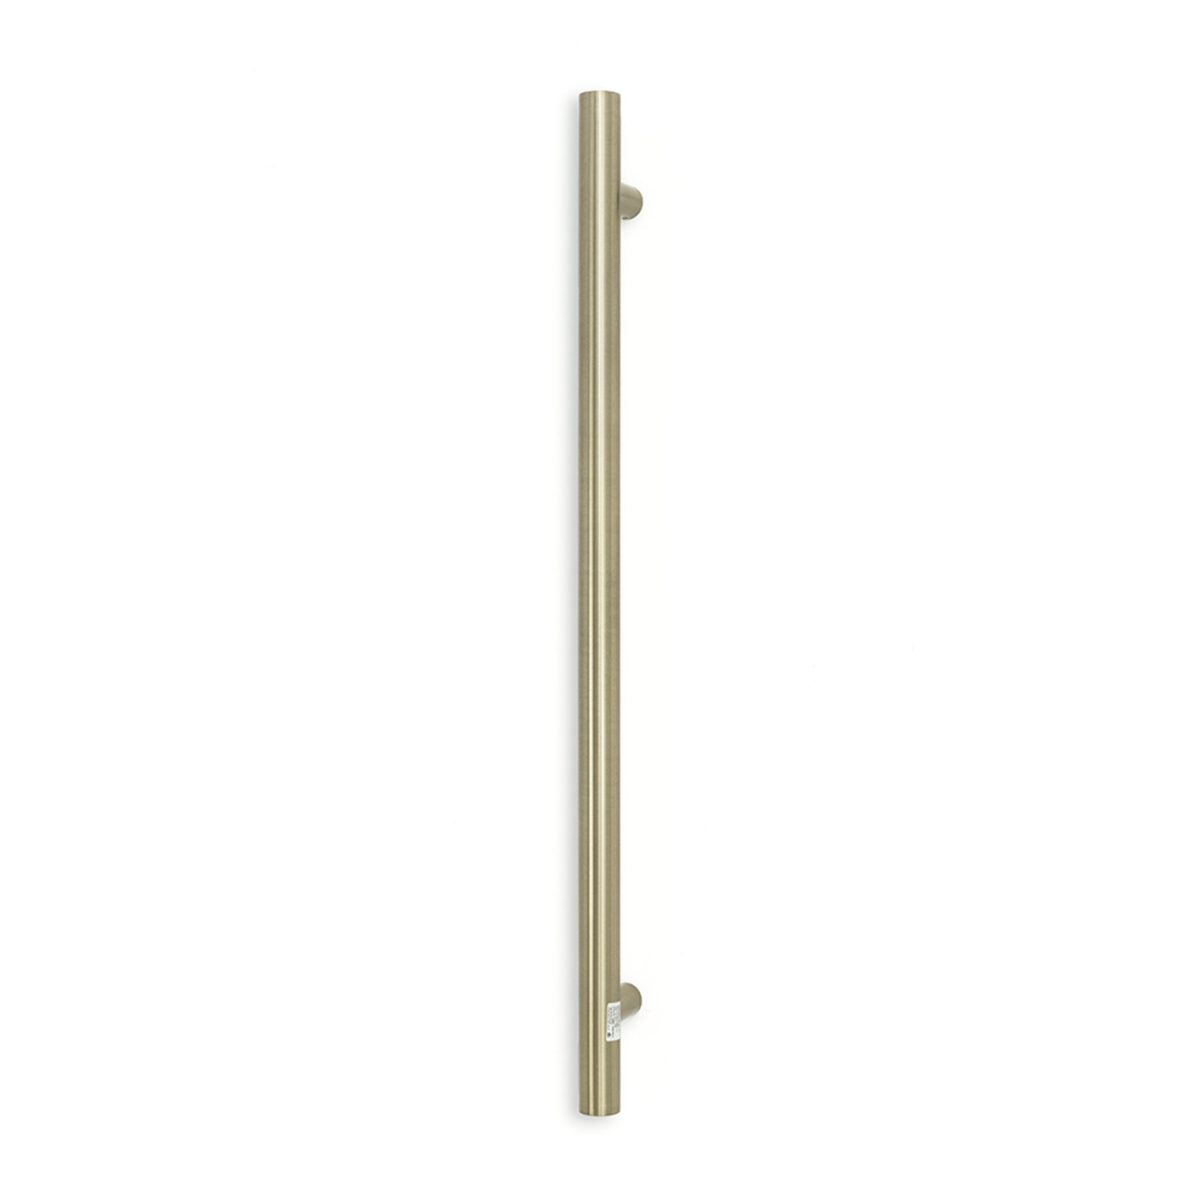 RADIANT VTR-950 12VOLT LOW VOLTAGE ROUND SINGLE BAR VERTICAL HEATED TOWEL RAIL 40 X 950MM COLOURED